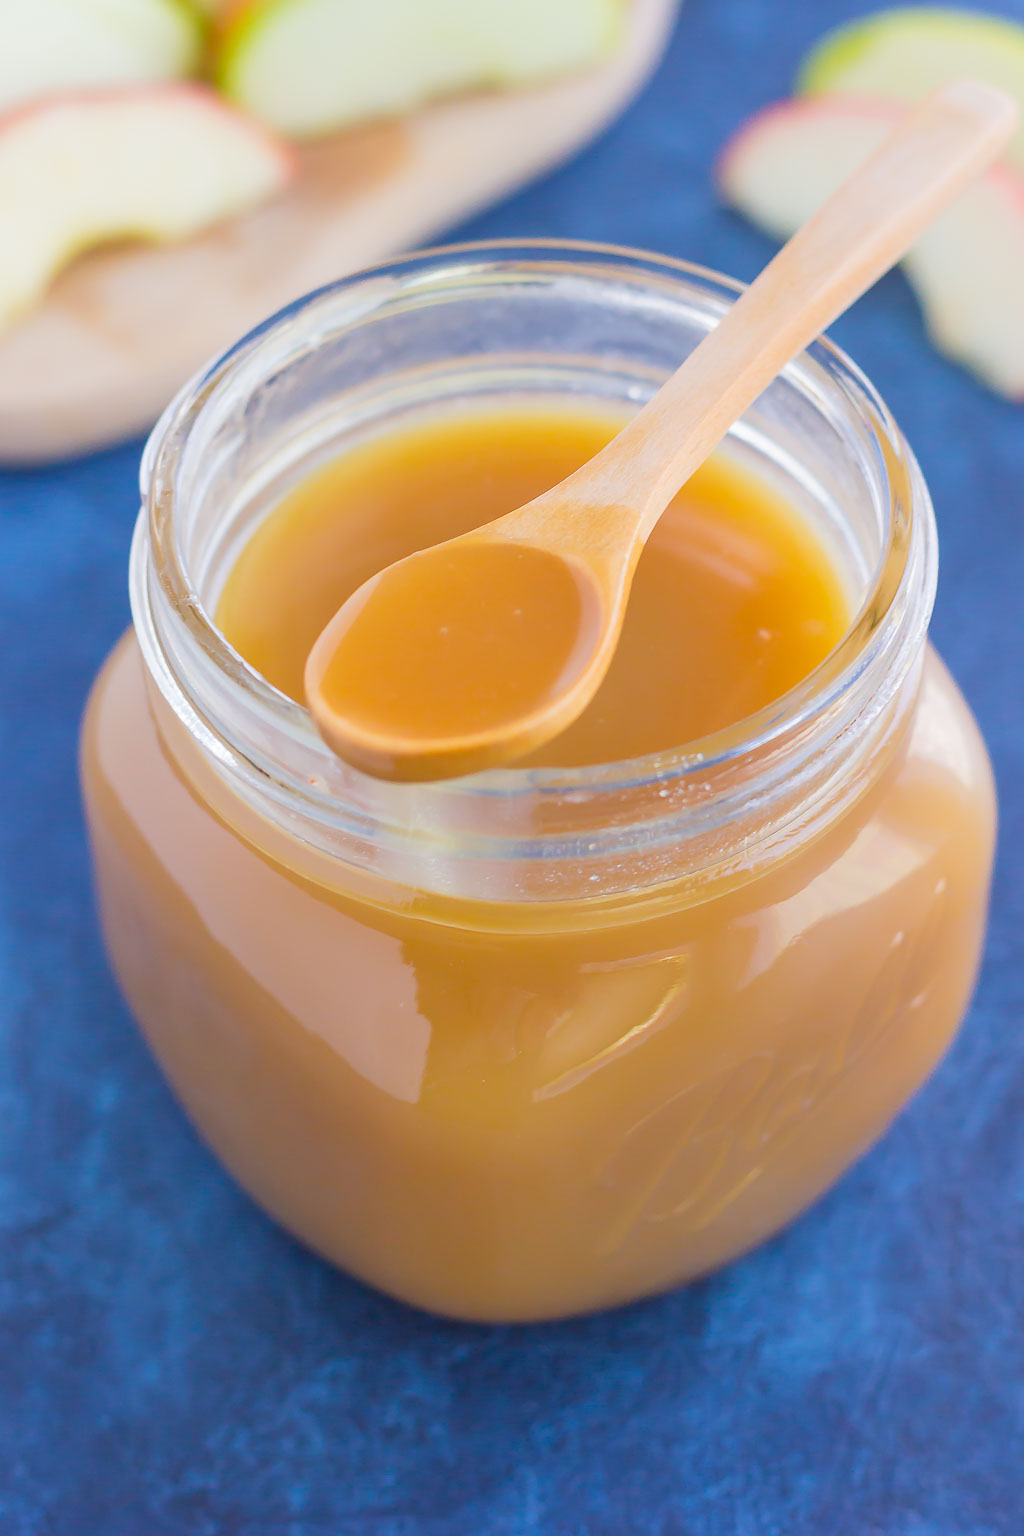 Sweet, smooth, and full of flavor, this Salted Caramel Sauce is just itching to be poured over ice cream, drizzled over pancakes, or eaten with spoon.